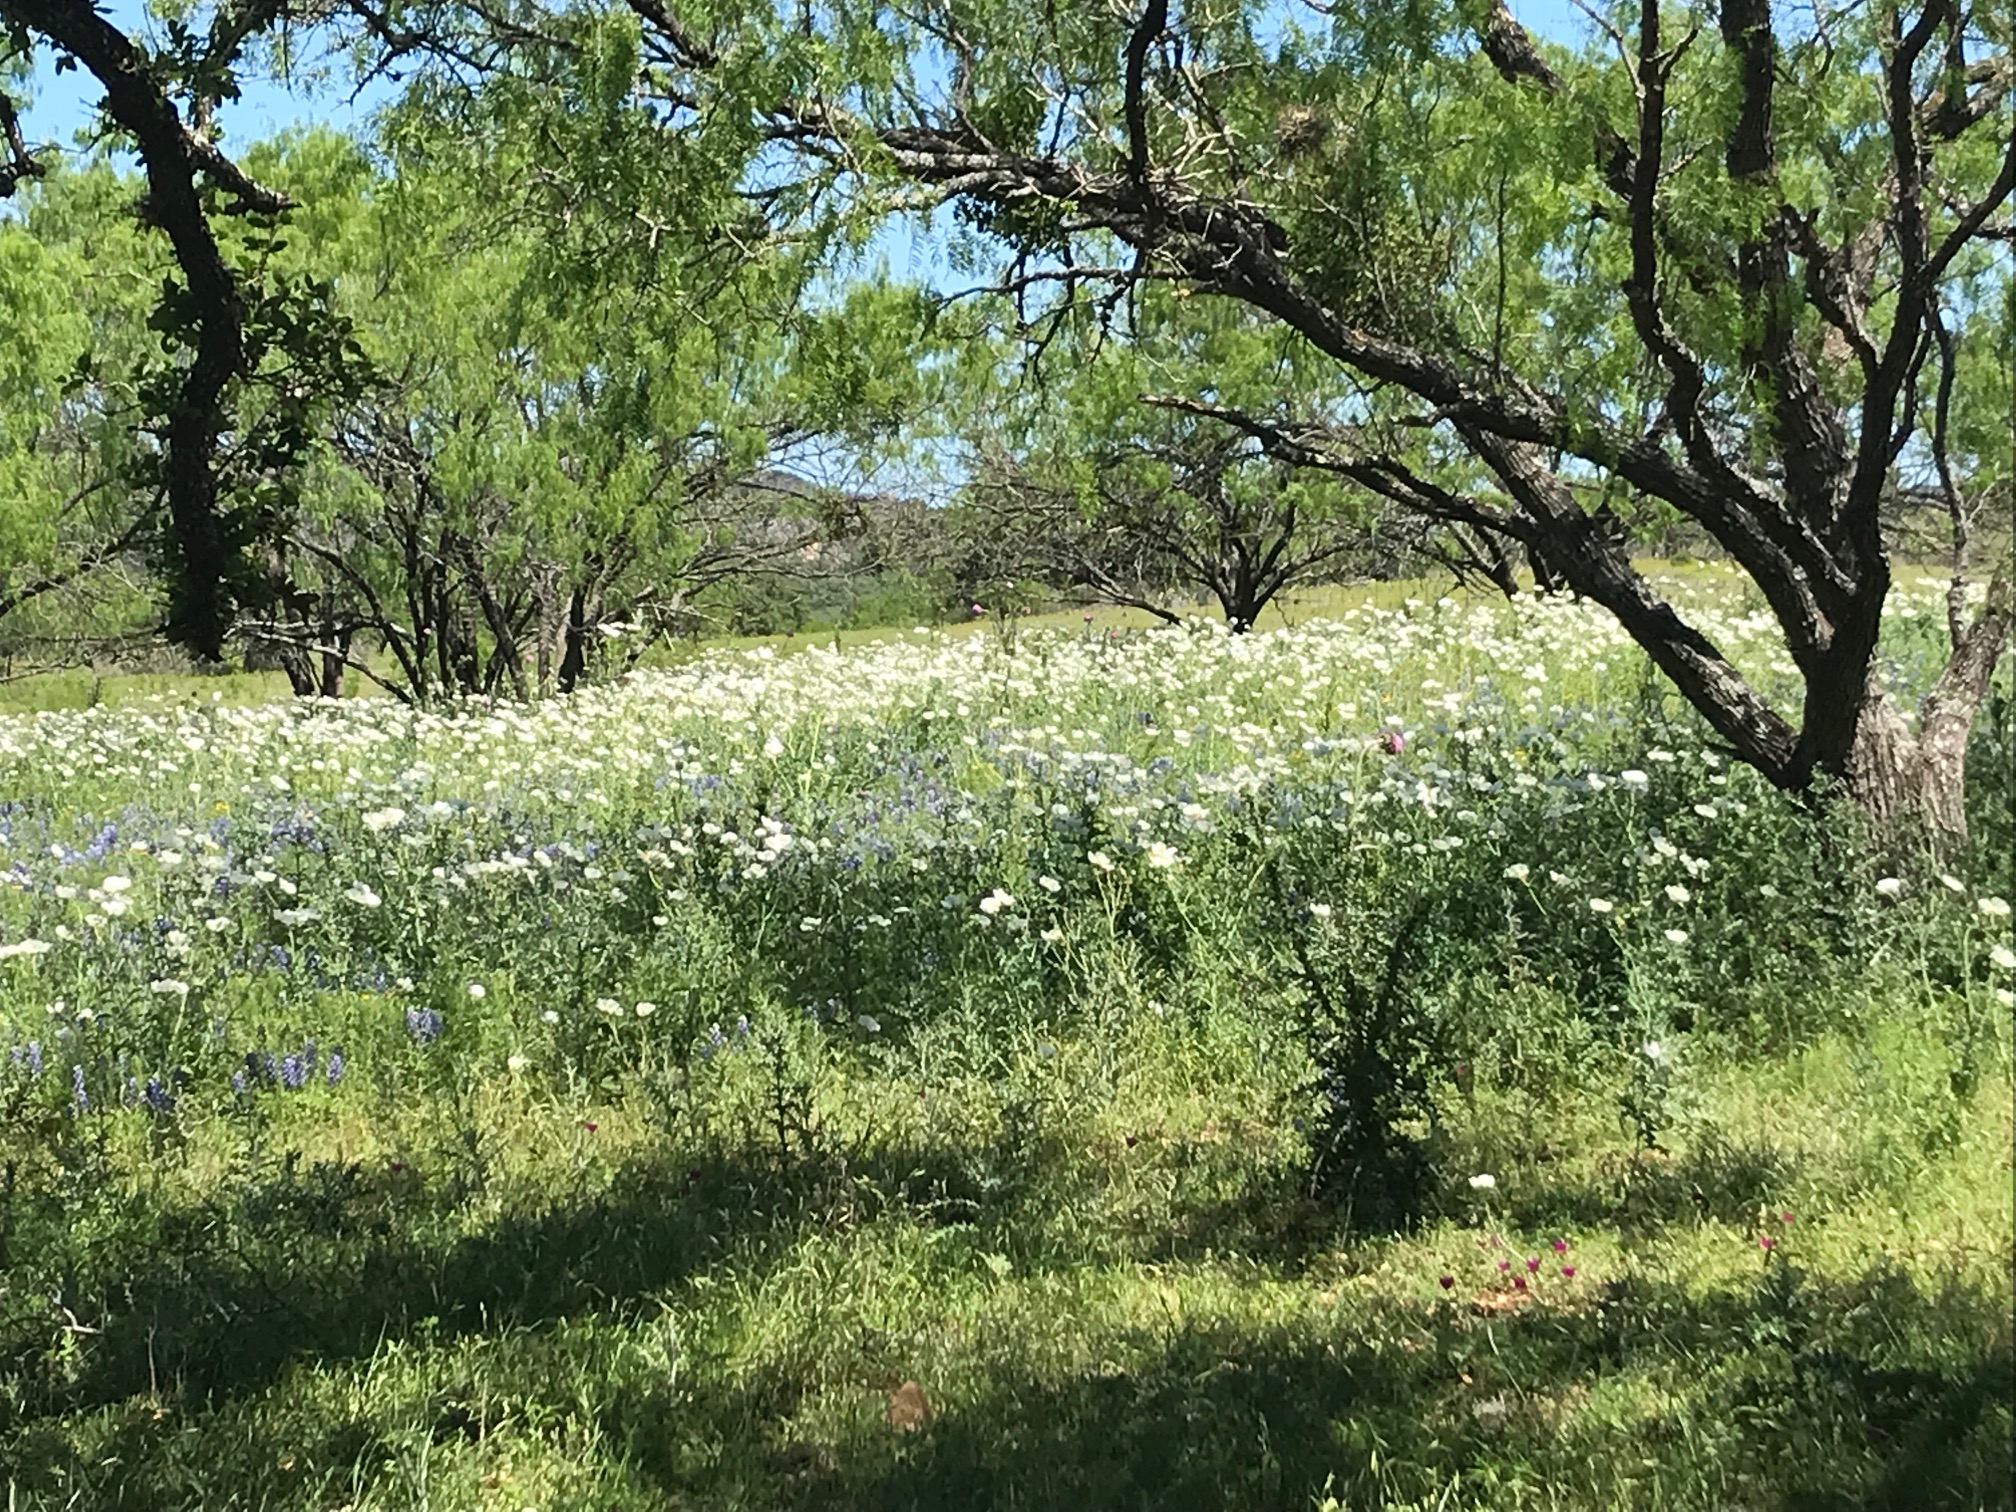 April in Texas—Friends, Wild Flowers, LBJ Ranch and Cowboy BK